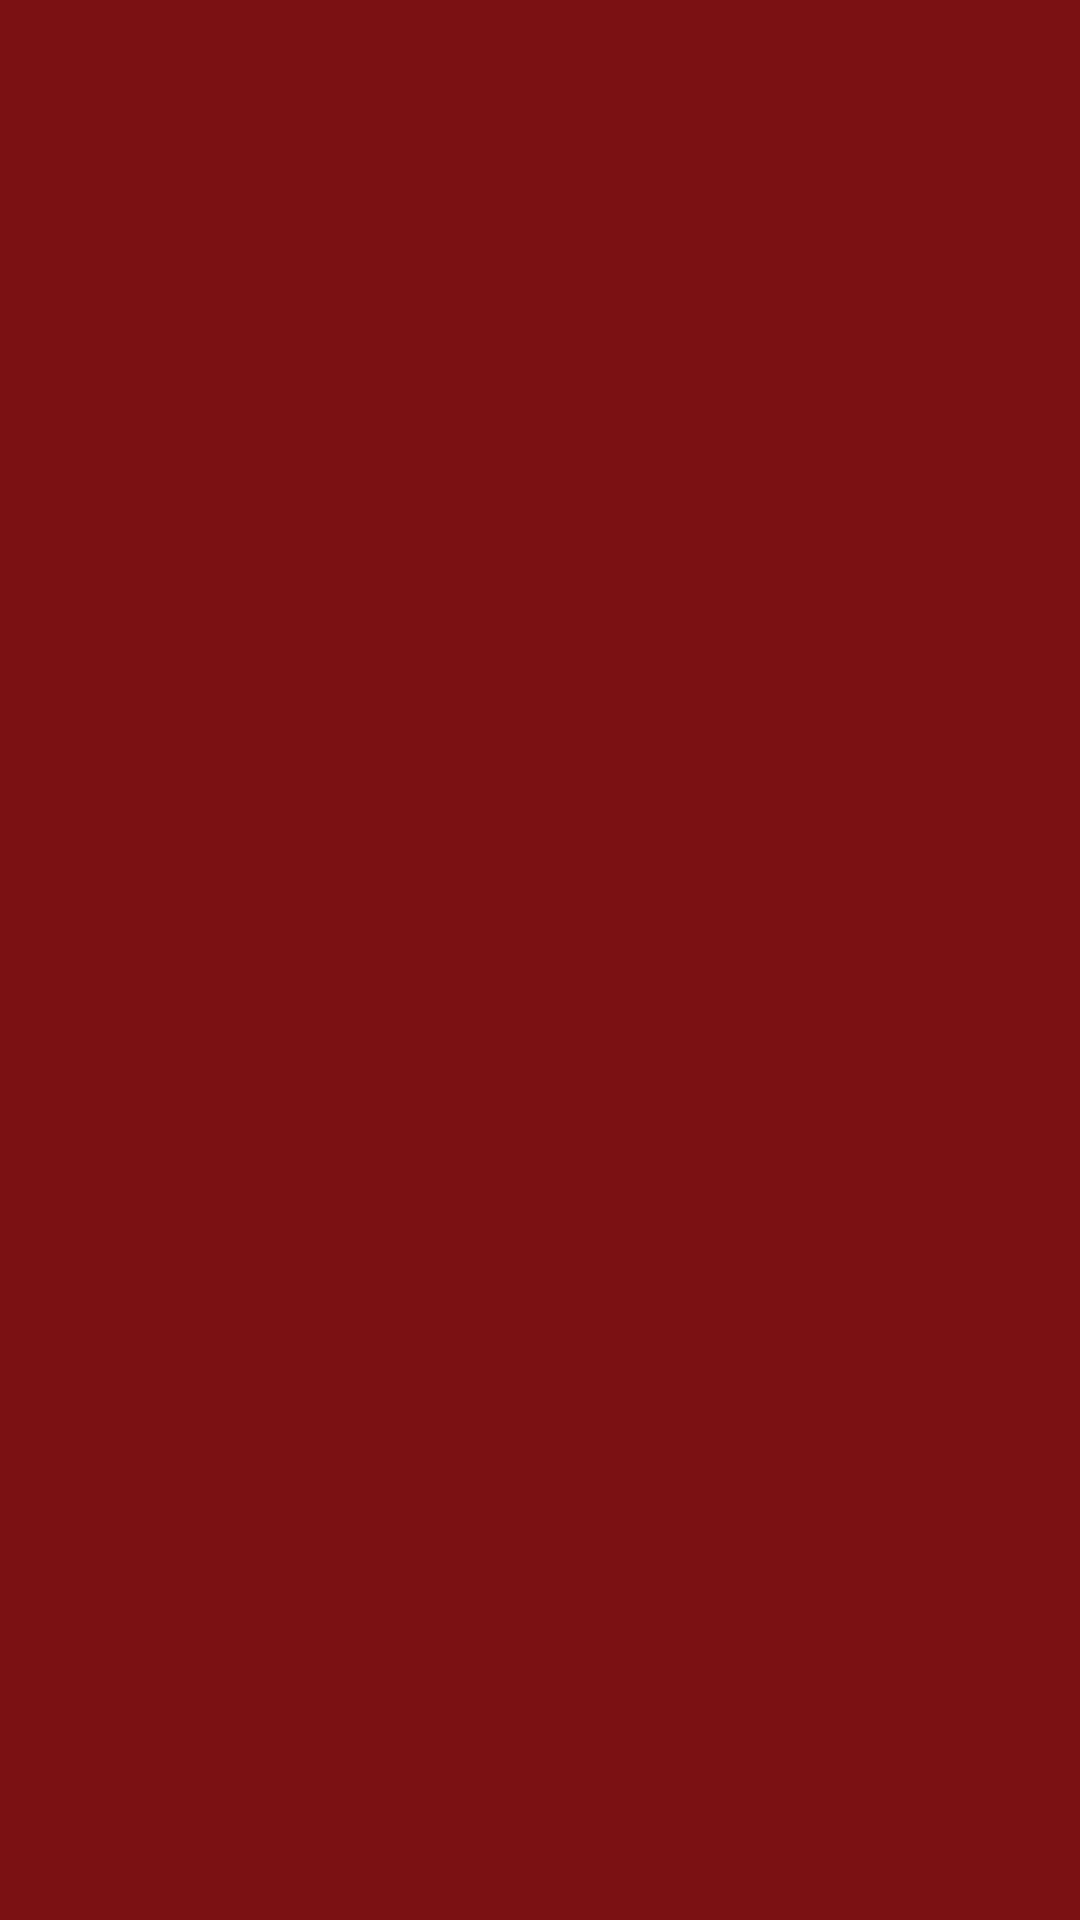 1080x1920 UP Maroon Solid Color Background